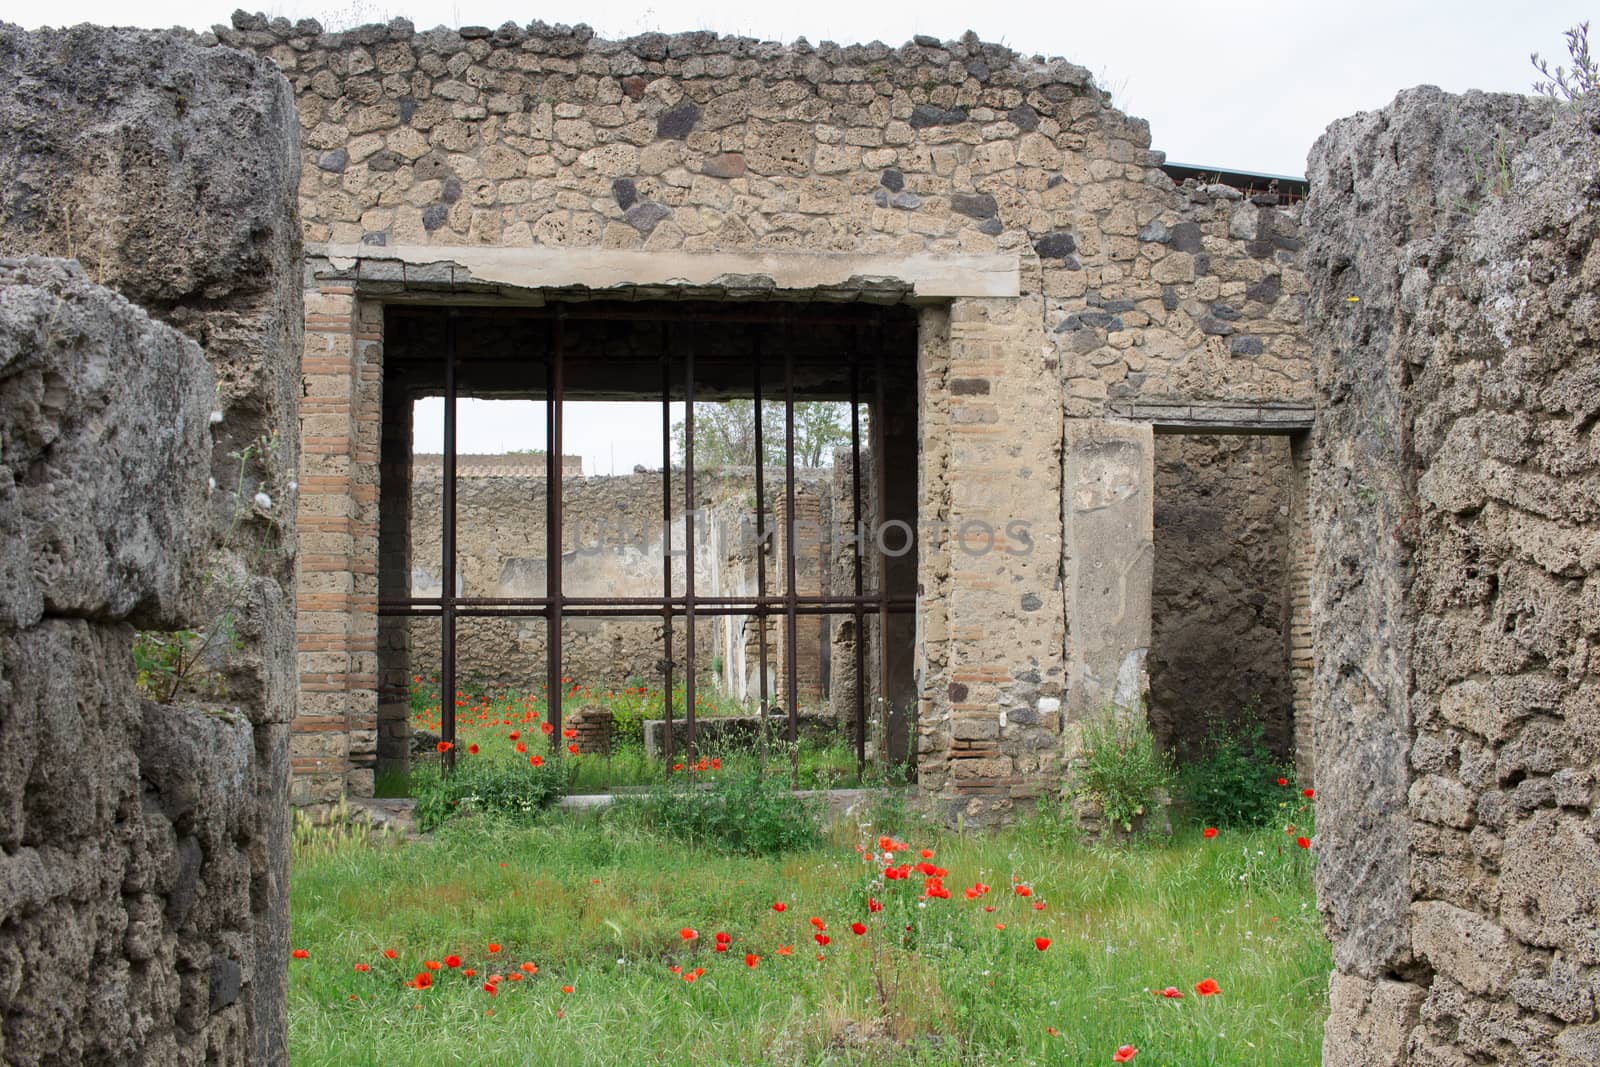 Red tulip poppy flowers blossom in meadow green grass under ancient ruined stone walls